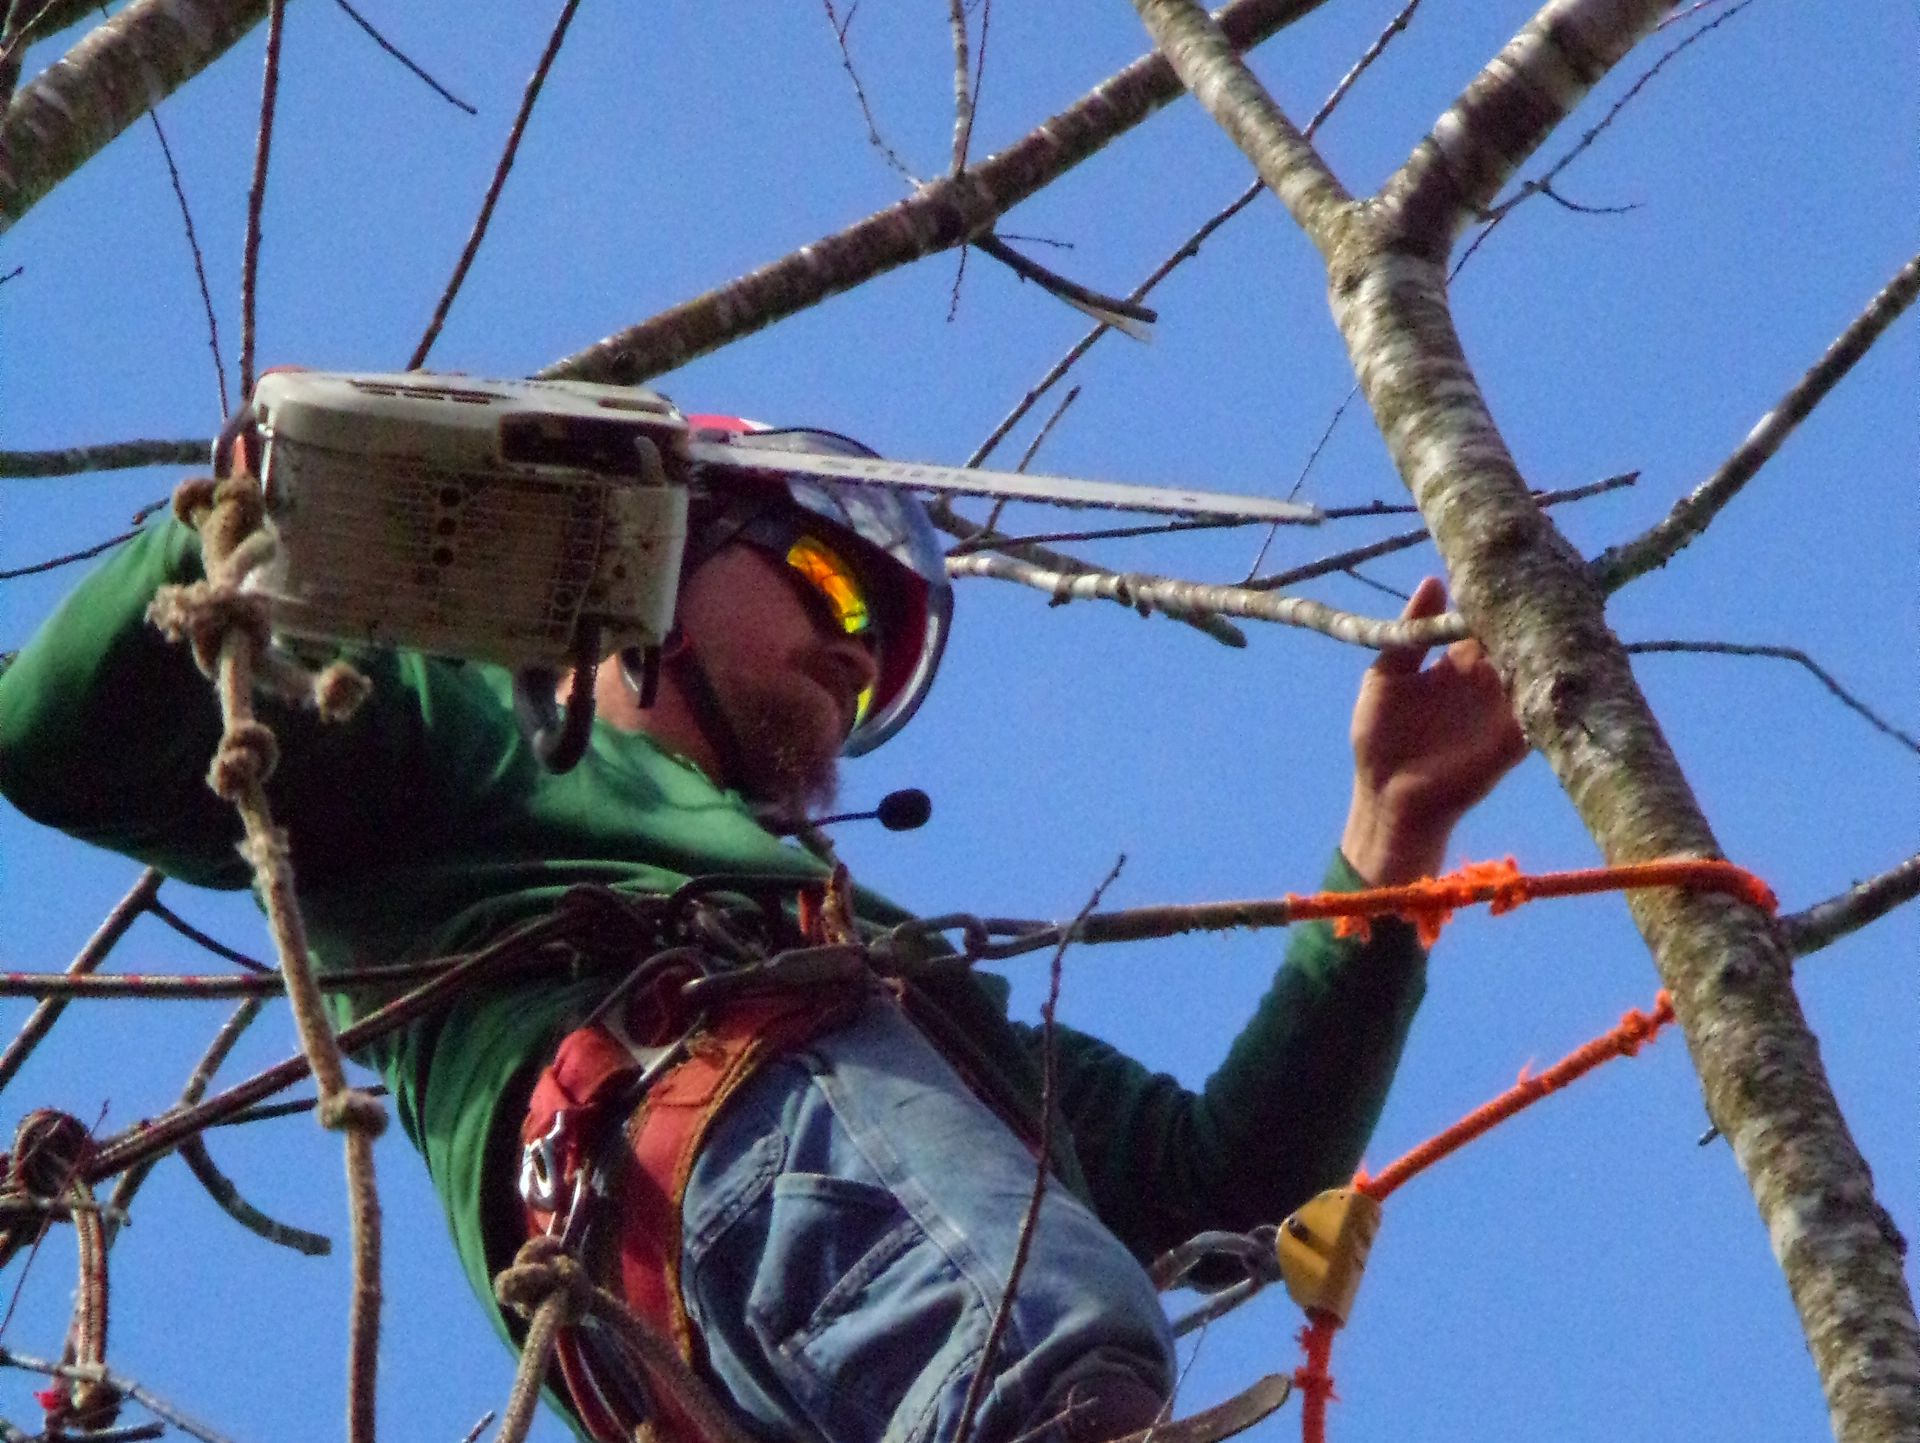 Experience tree climber using a chainsaw